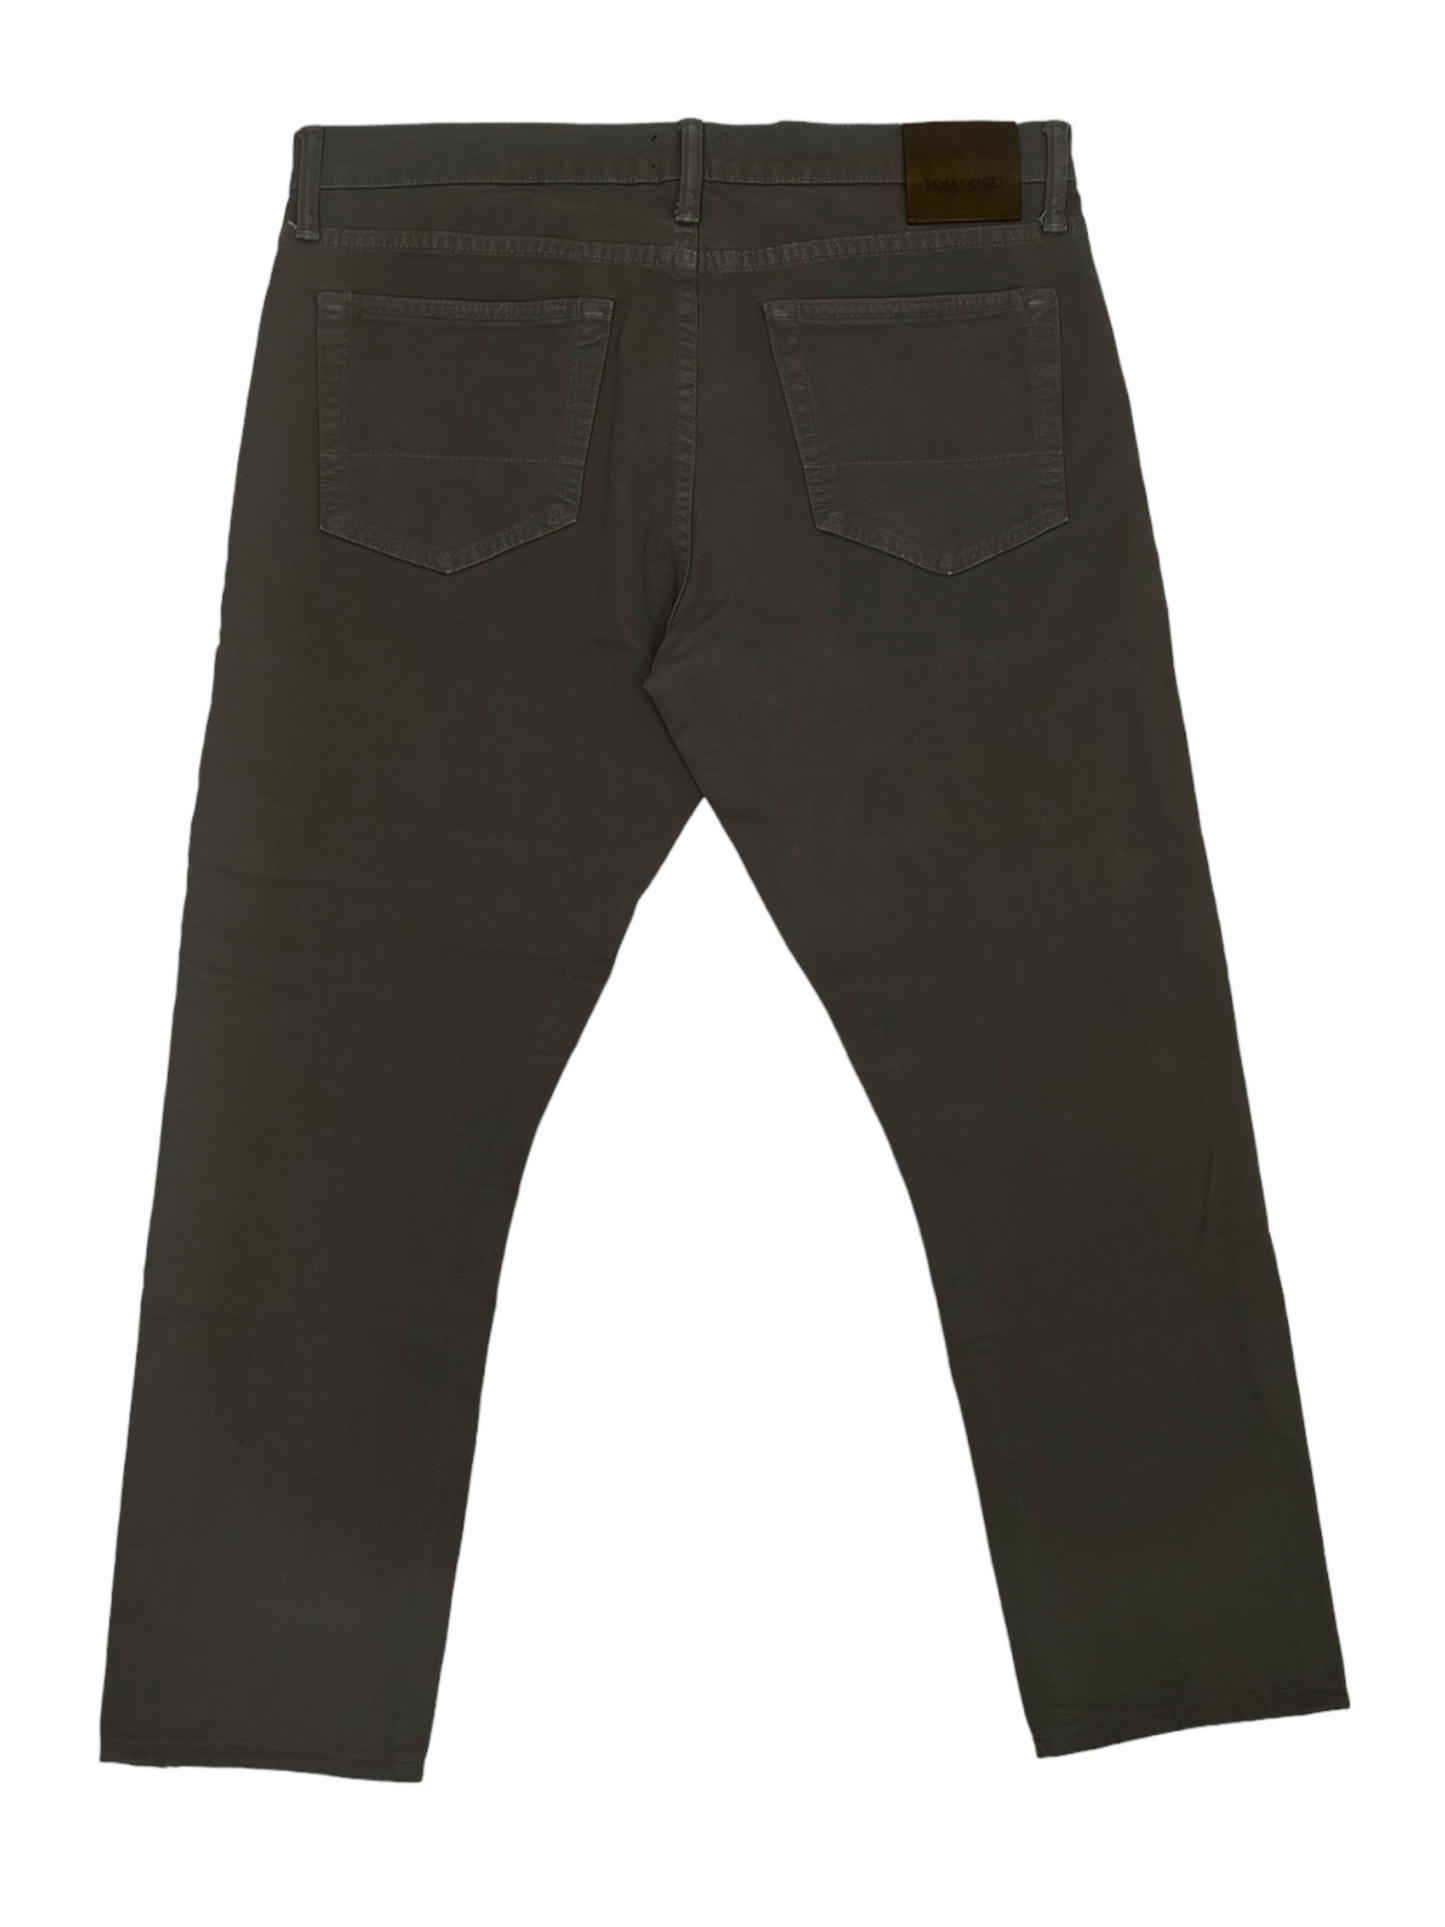 Tom Ford Charcoal Casual Pants 33W